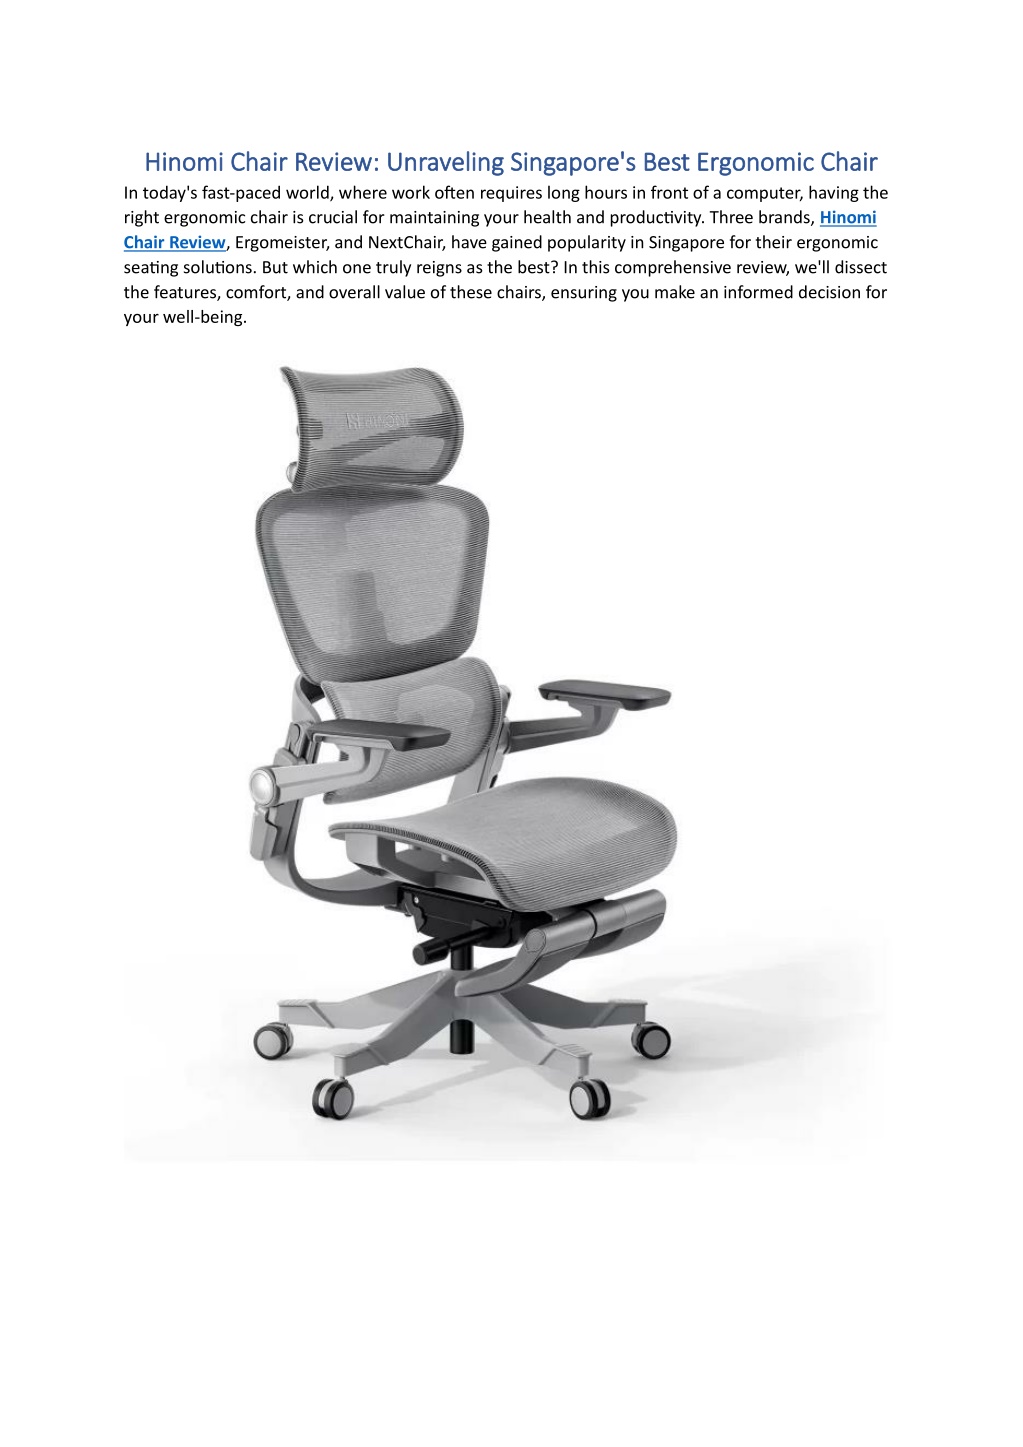 PPT - Hinomi Chair Review - Unraveling Singapore's Best Ergonomic Chair  PowerPoint Presentation - ID:12603295